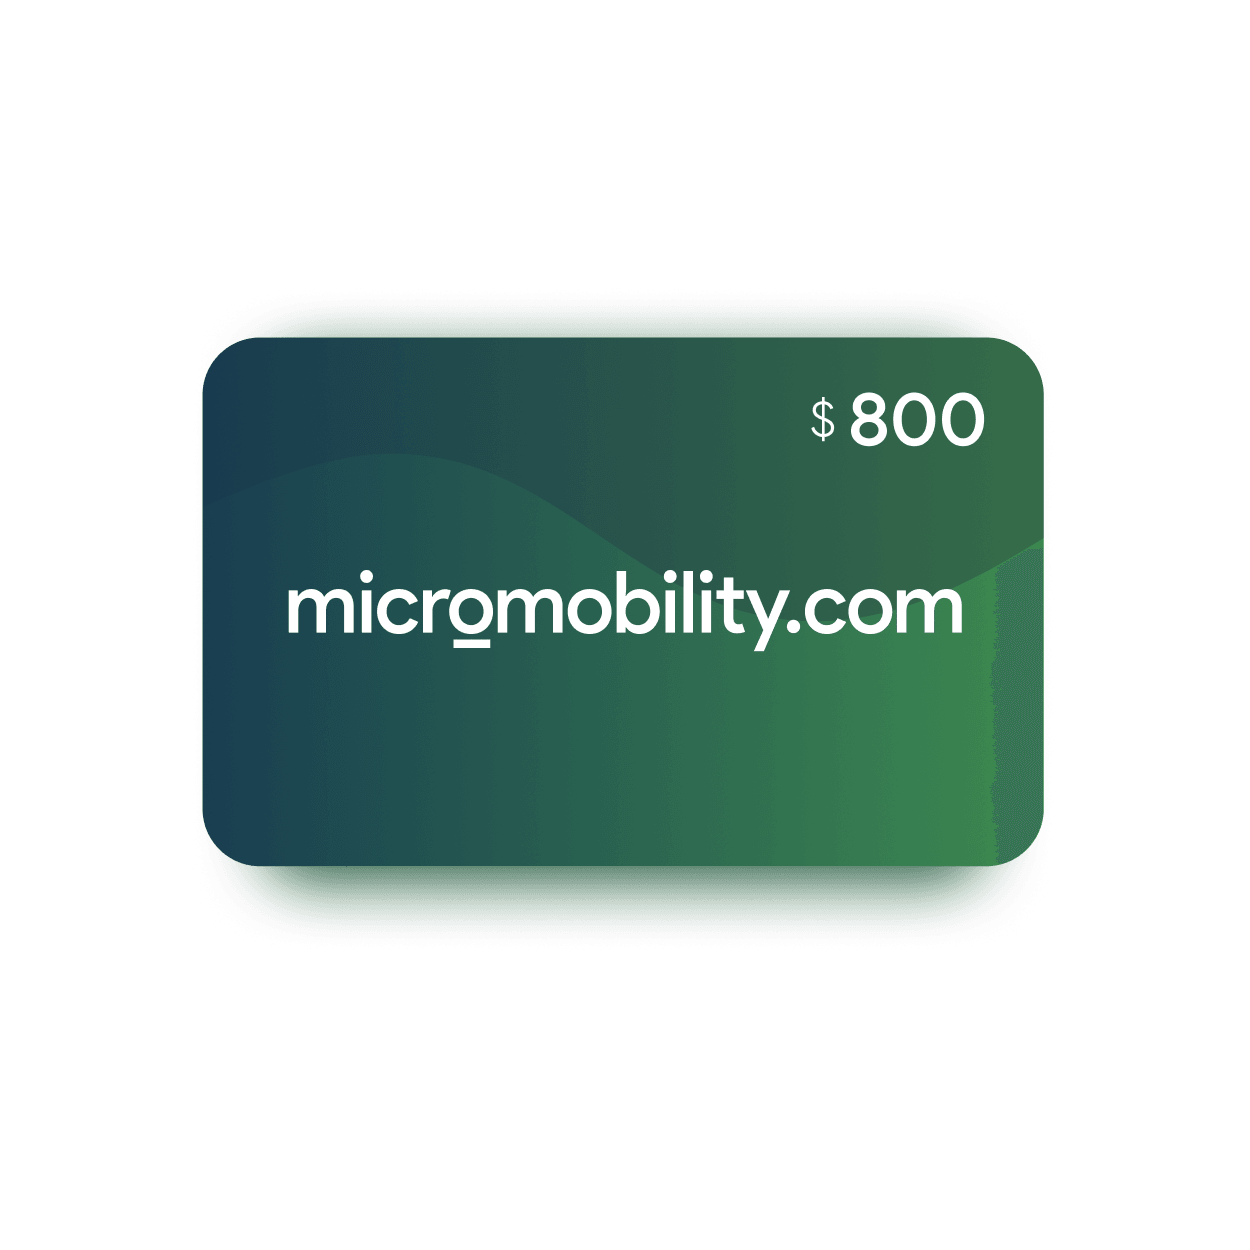 Giftcard - micromobility.com